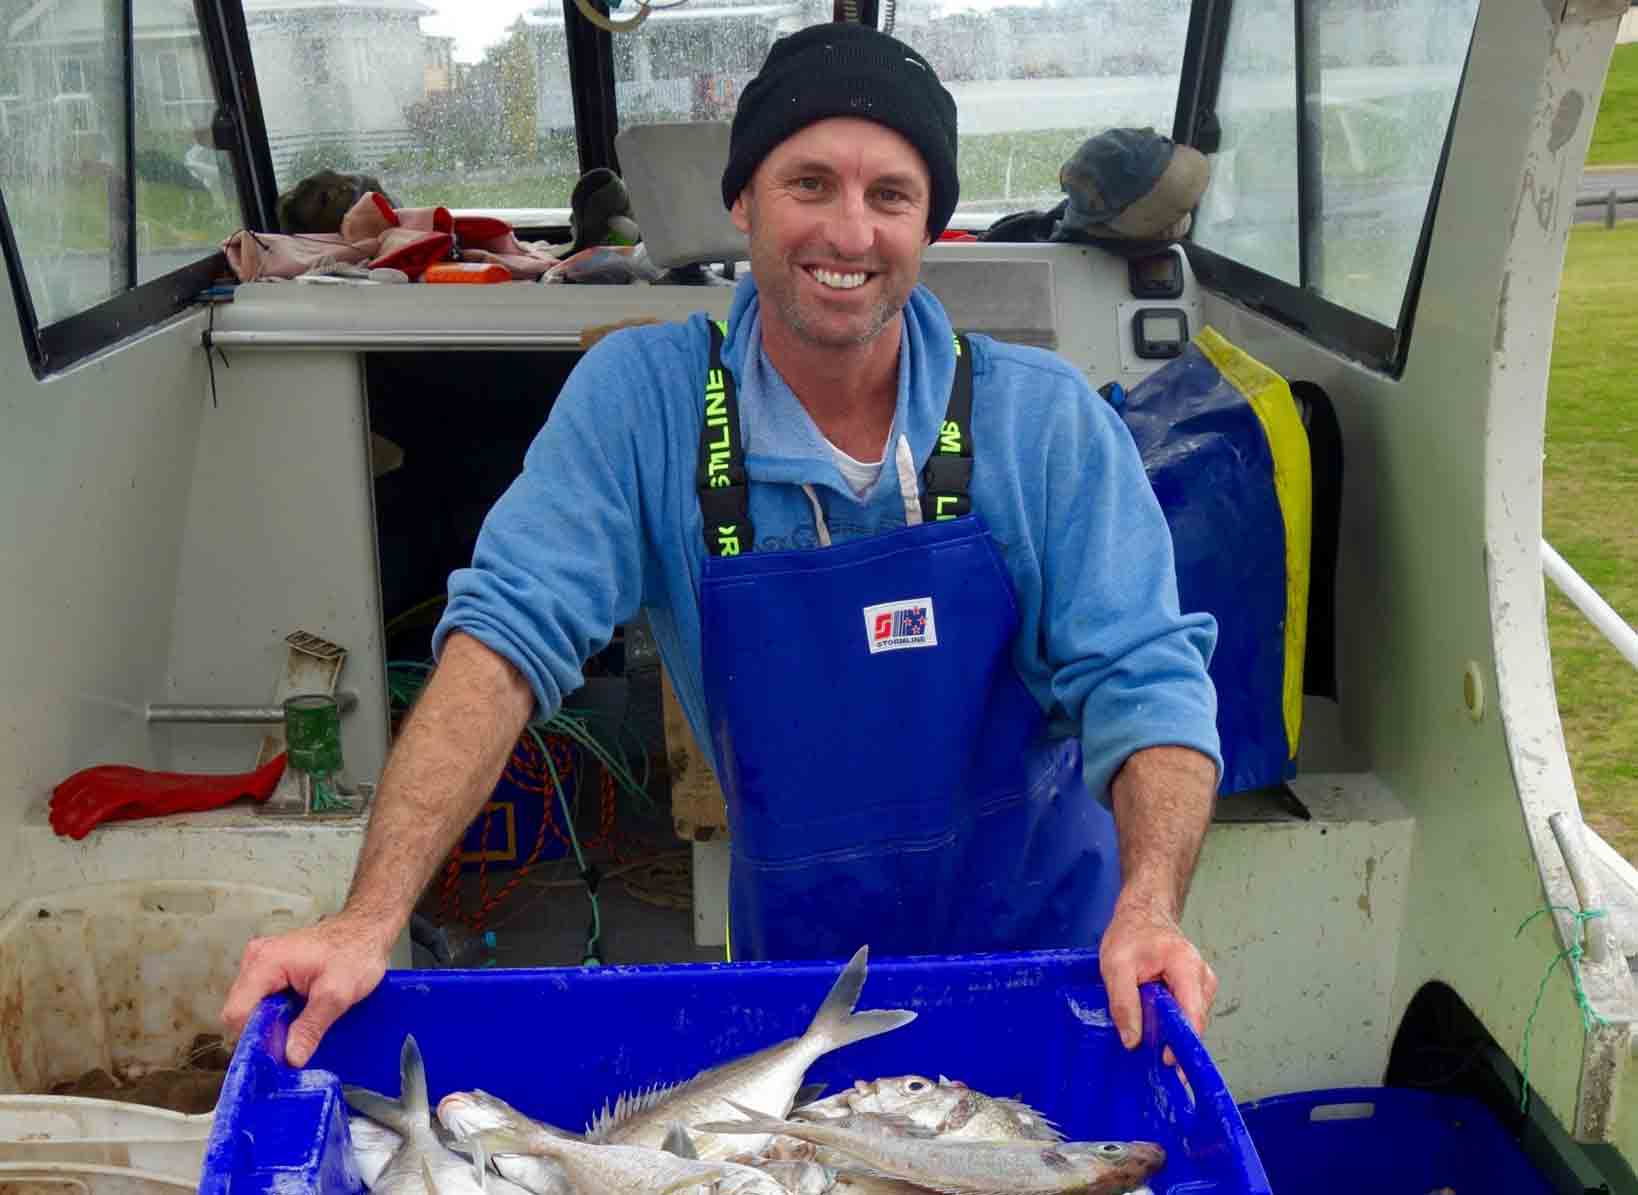 Trapman Bermagui with some freshly caught fish